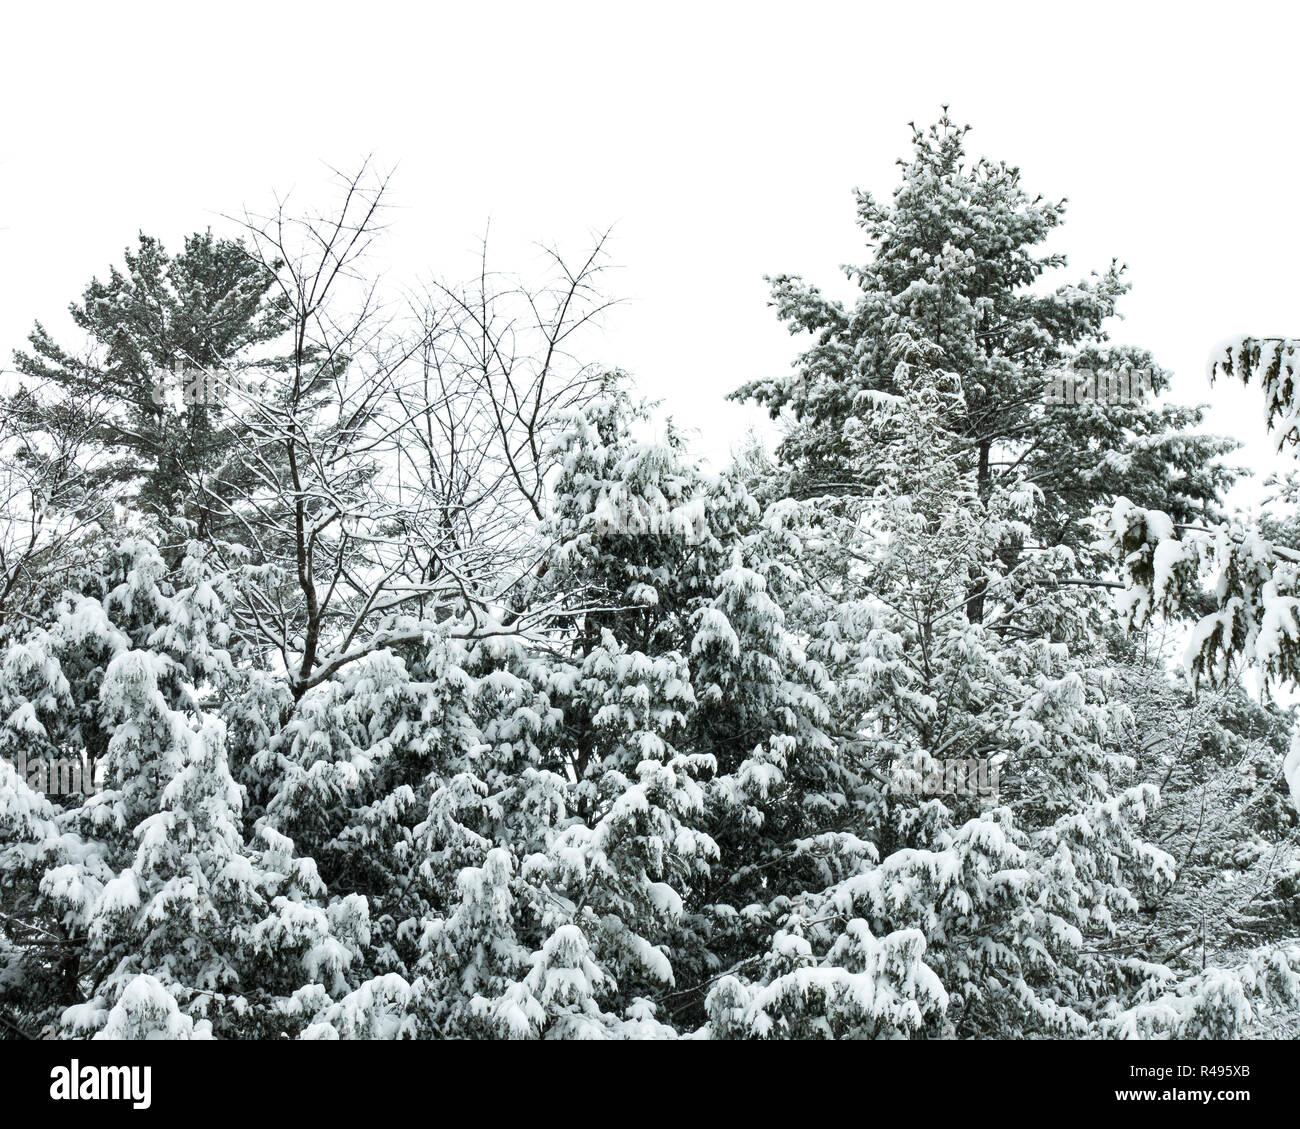 A background image of snow covering evergreen trees in the forest. Stock Photo